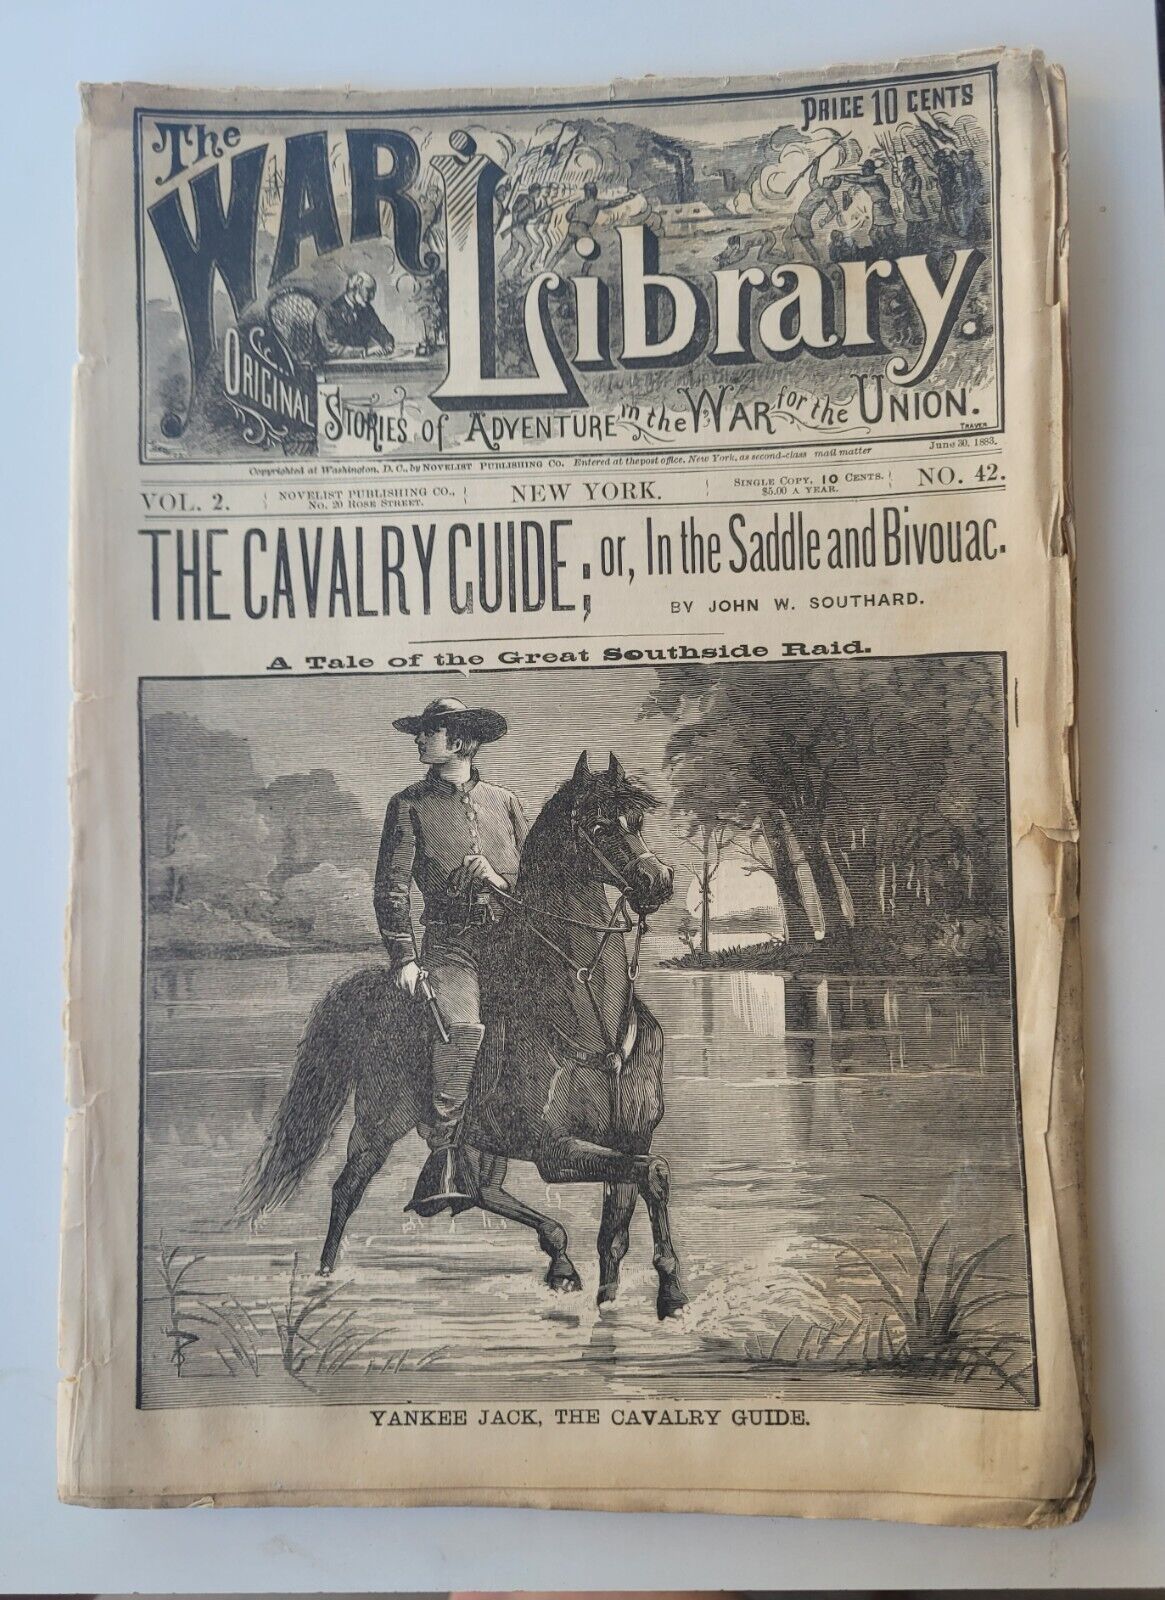 THE WAR LIBRARY – 1883 CIVIL WAR PULP MAGAZINE–THE CAVALRY GUIDE ILL FRONT COVER